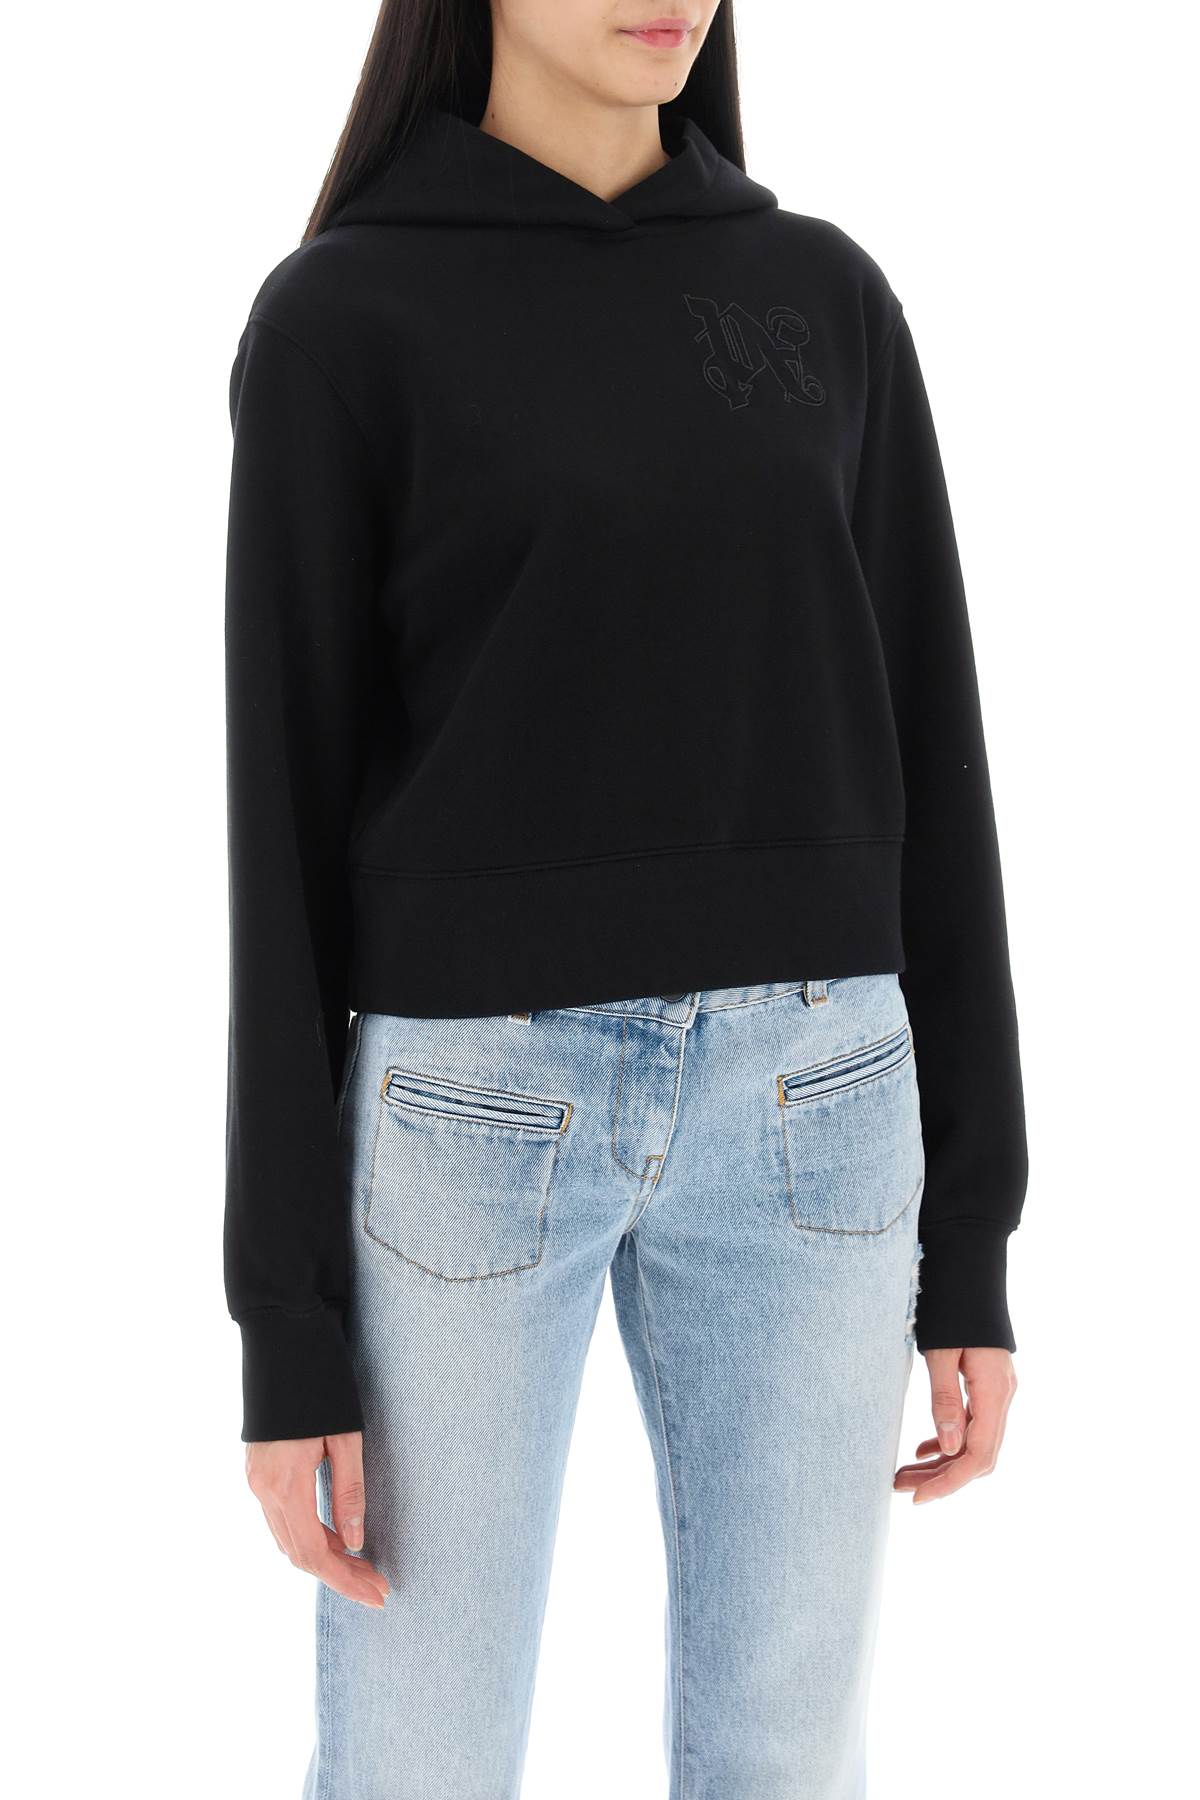 PALM ANGELS Black Cropped Hoodie with Chic Monogram Embroidery